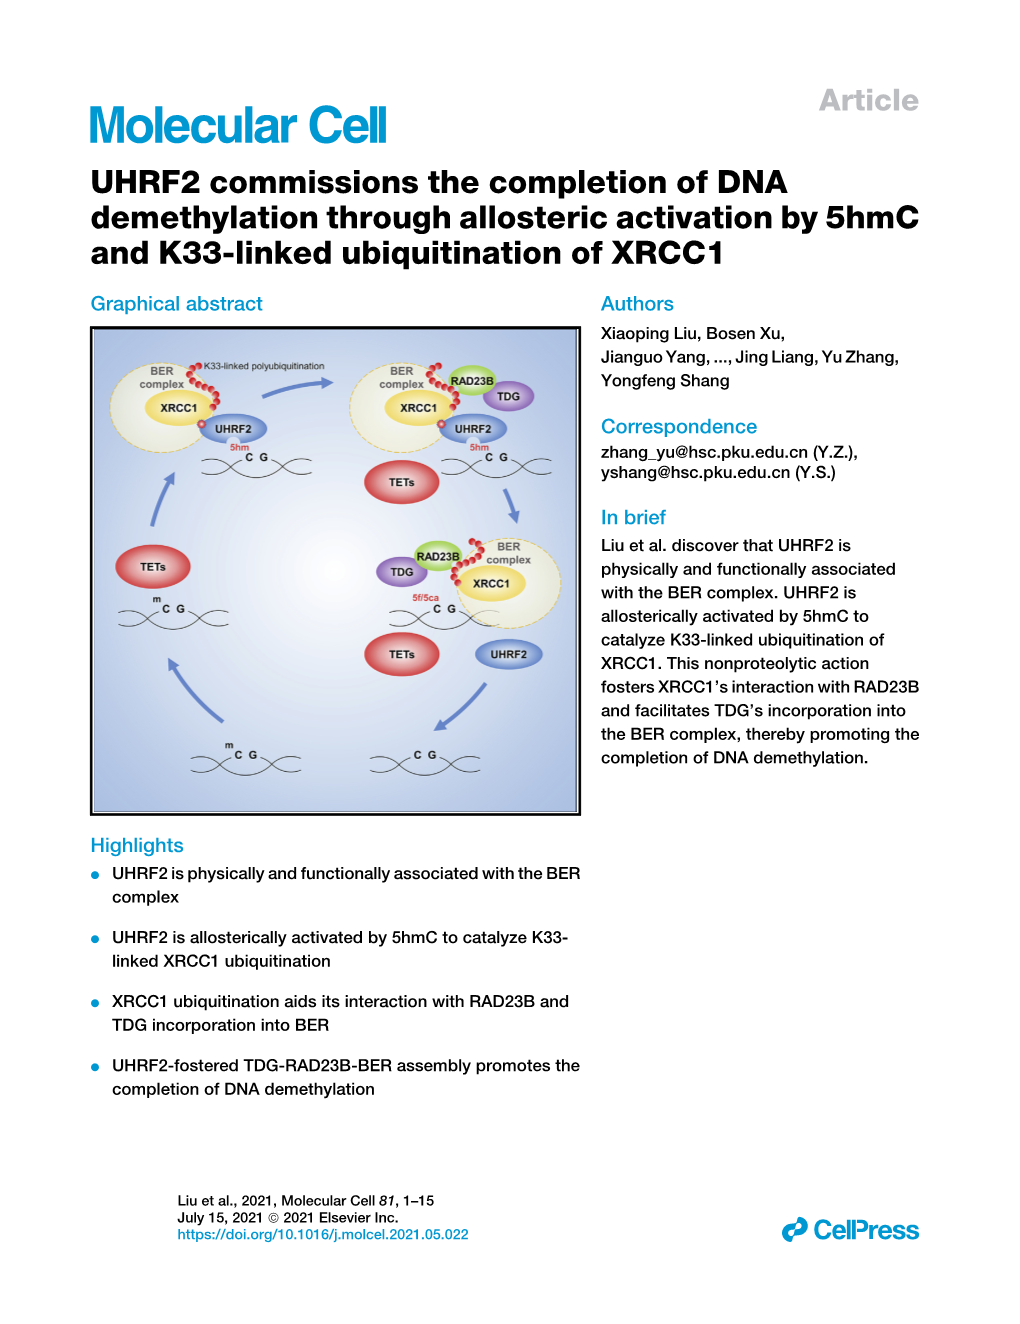 UHRF2 Commissions the Completion of DNA Demethylation Through Allosteric Activation by 5Hmc and K33-Linked Ubiquitination of XRCC1